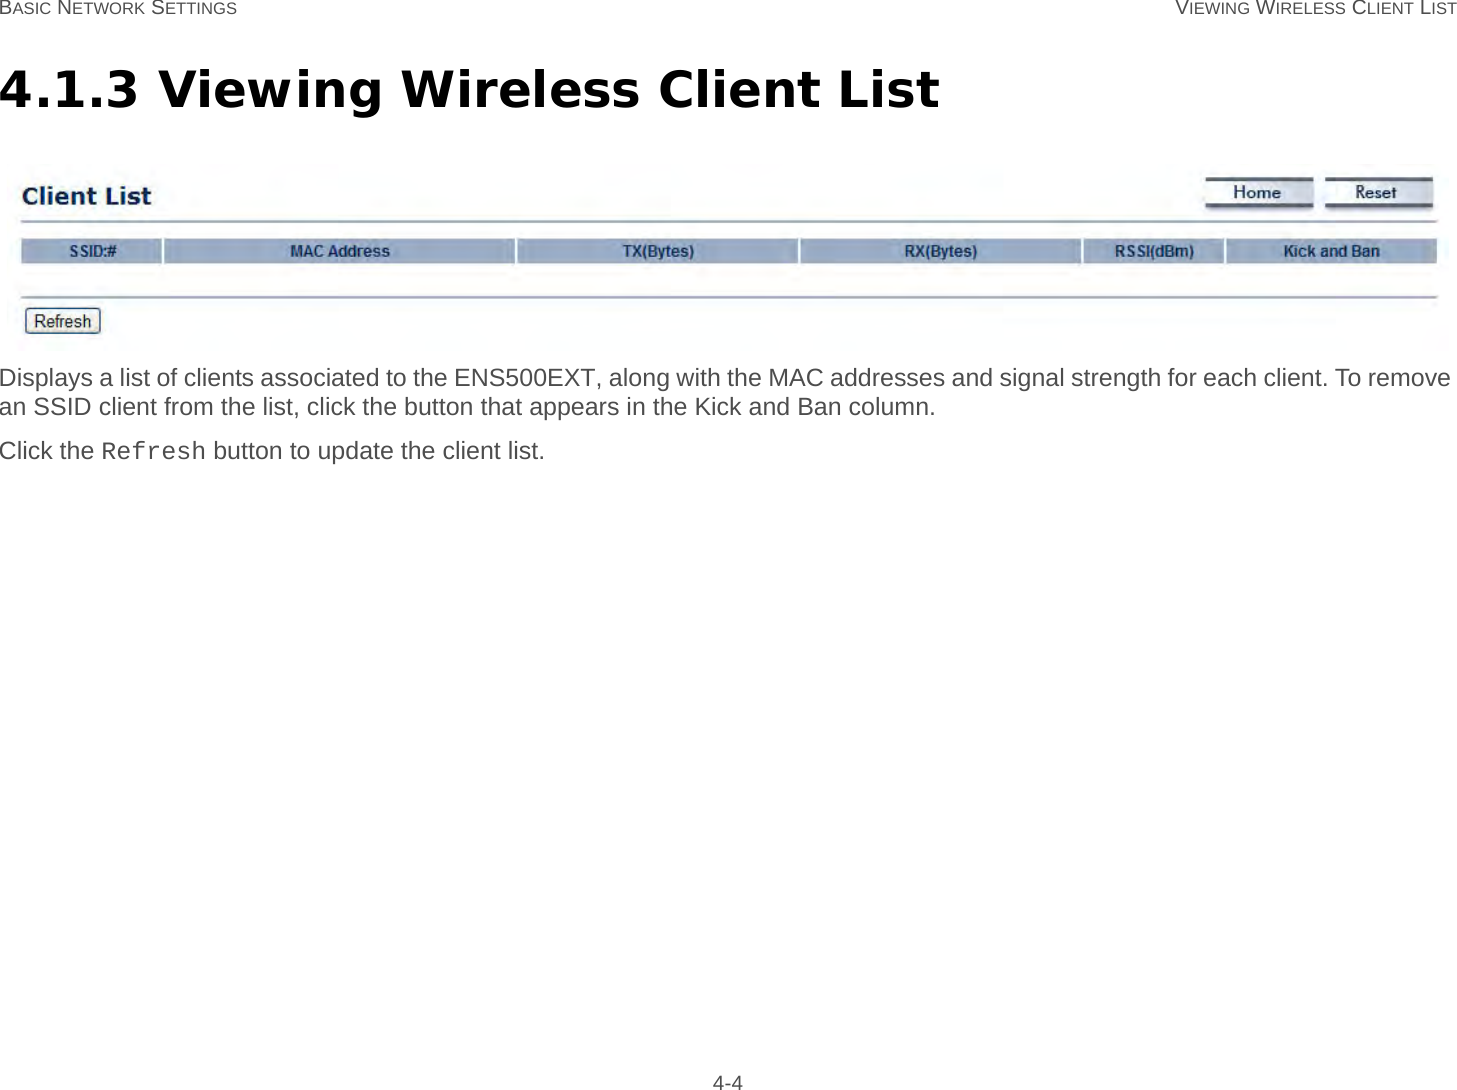 BASIC NETWORK SETTINGS VIEWING WIRELESS CLIENT LIST 4-44.1.3 Viewing Wireless Client ListDisplays a list of clients associated to the ENS500EXT, along with the MAC addresses and signal strength for each client. To remove an SSID client from the list, click the button that appears in the Kick and Ban column.Click the Refresh button to update the client list.